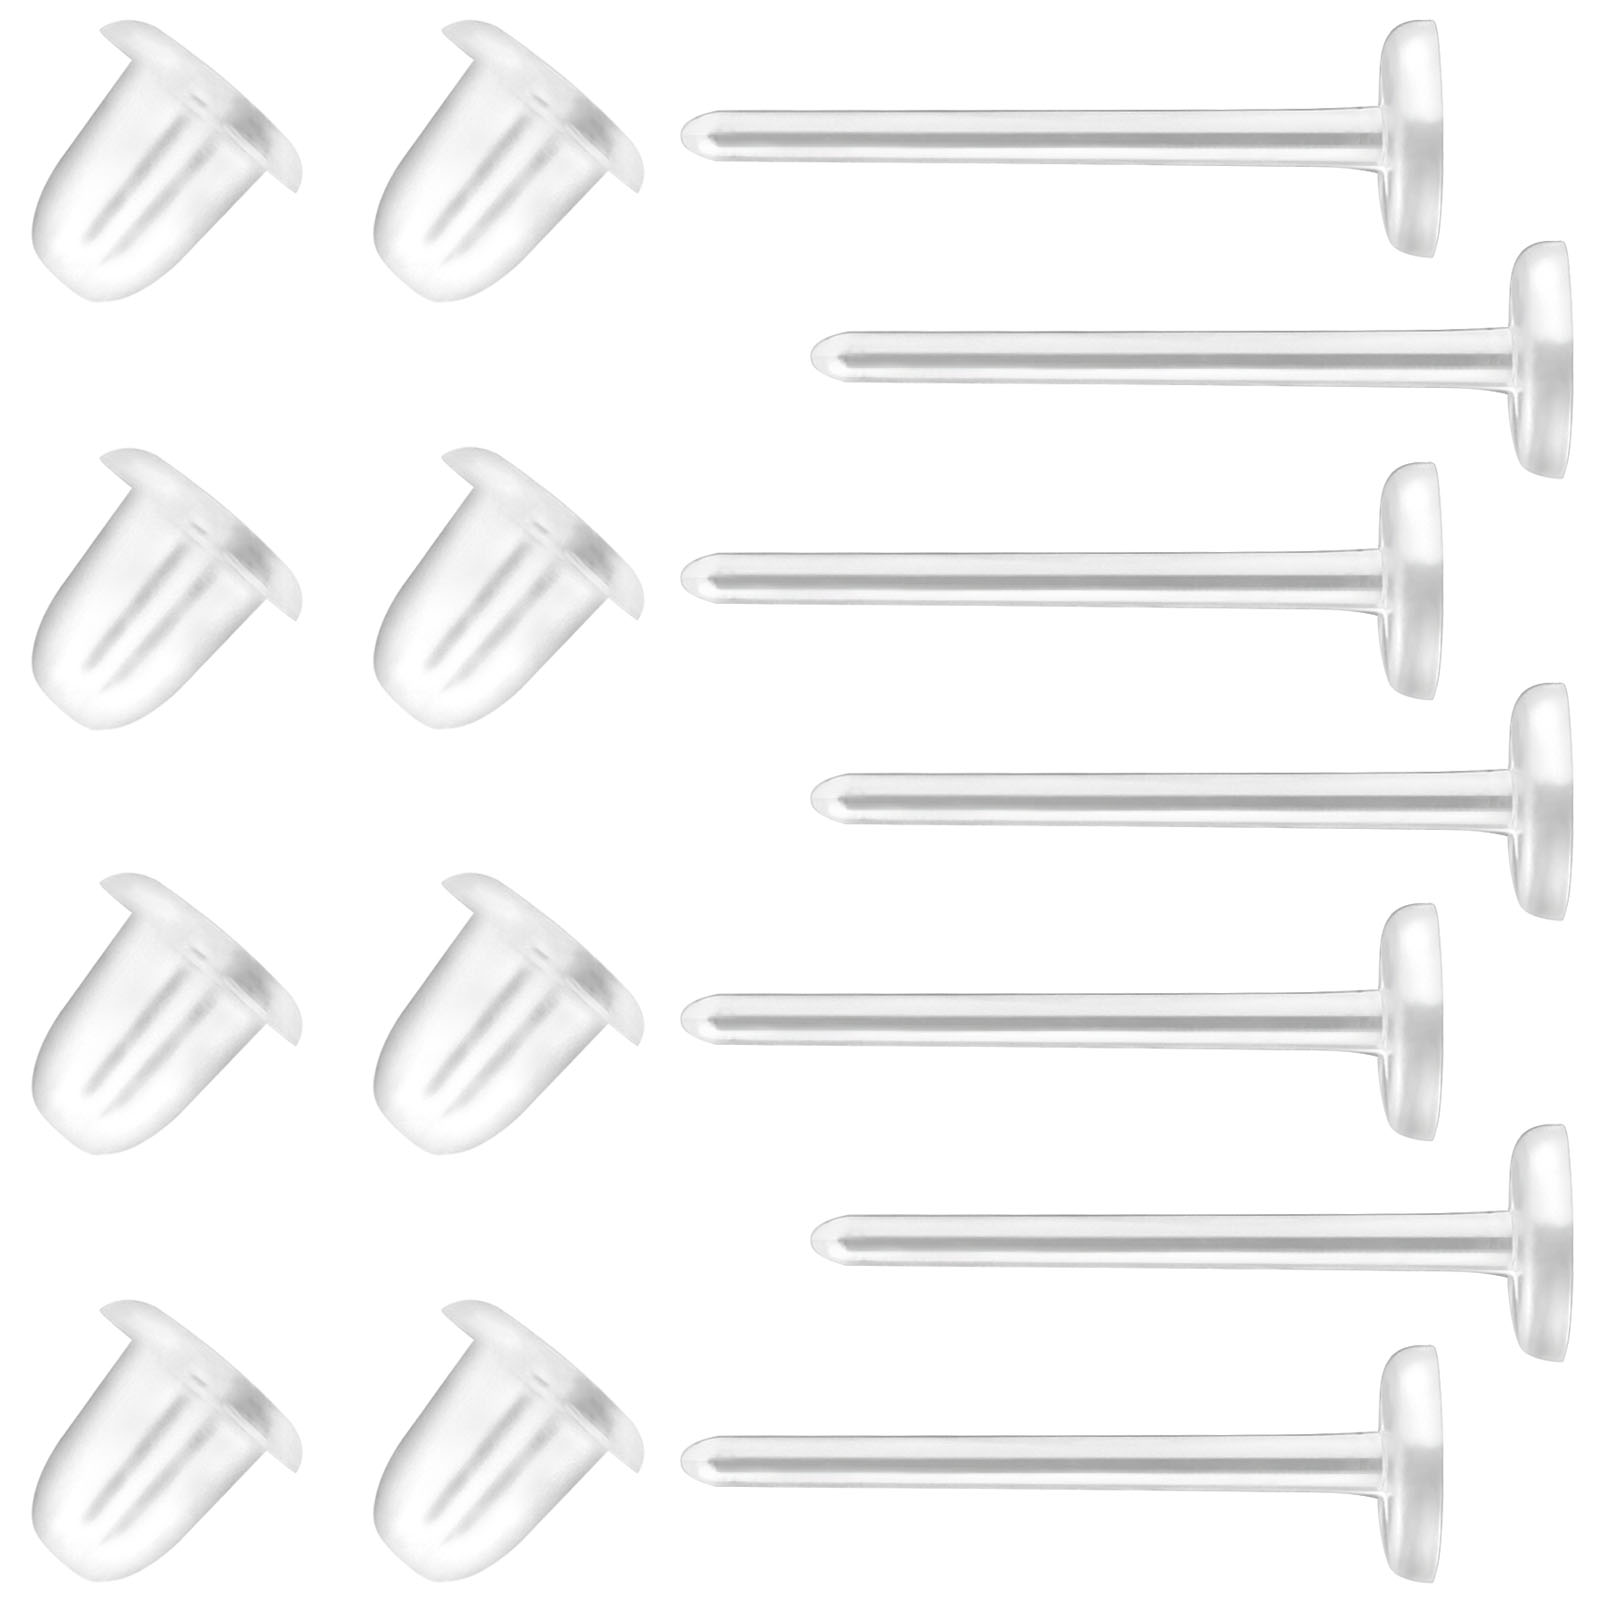 Dengmore Earrings 25 Pairs of Plastic Earring Posts and Transparent Earrings on The Back of Earrings, Women's, Size: One size, Clear